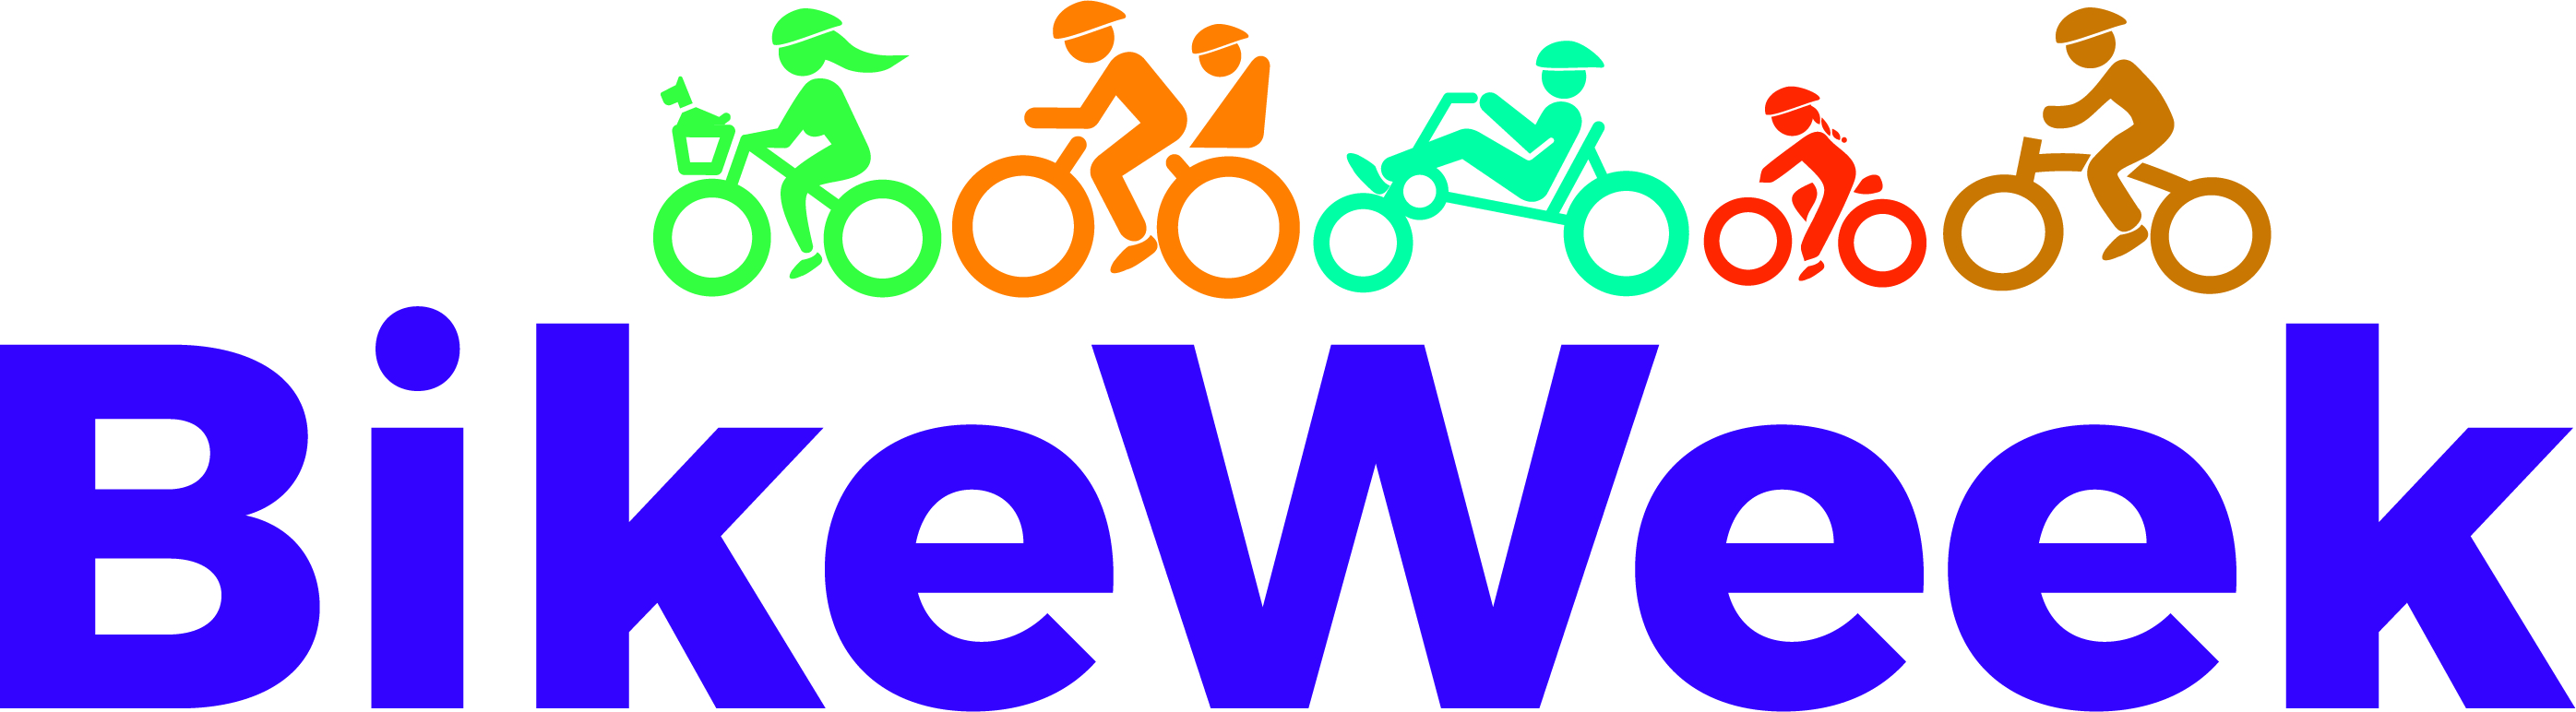 This image shows the Bike Week logo, which is made up of a range of diverse bikes.